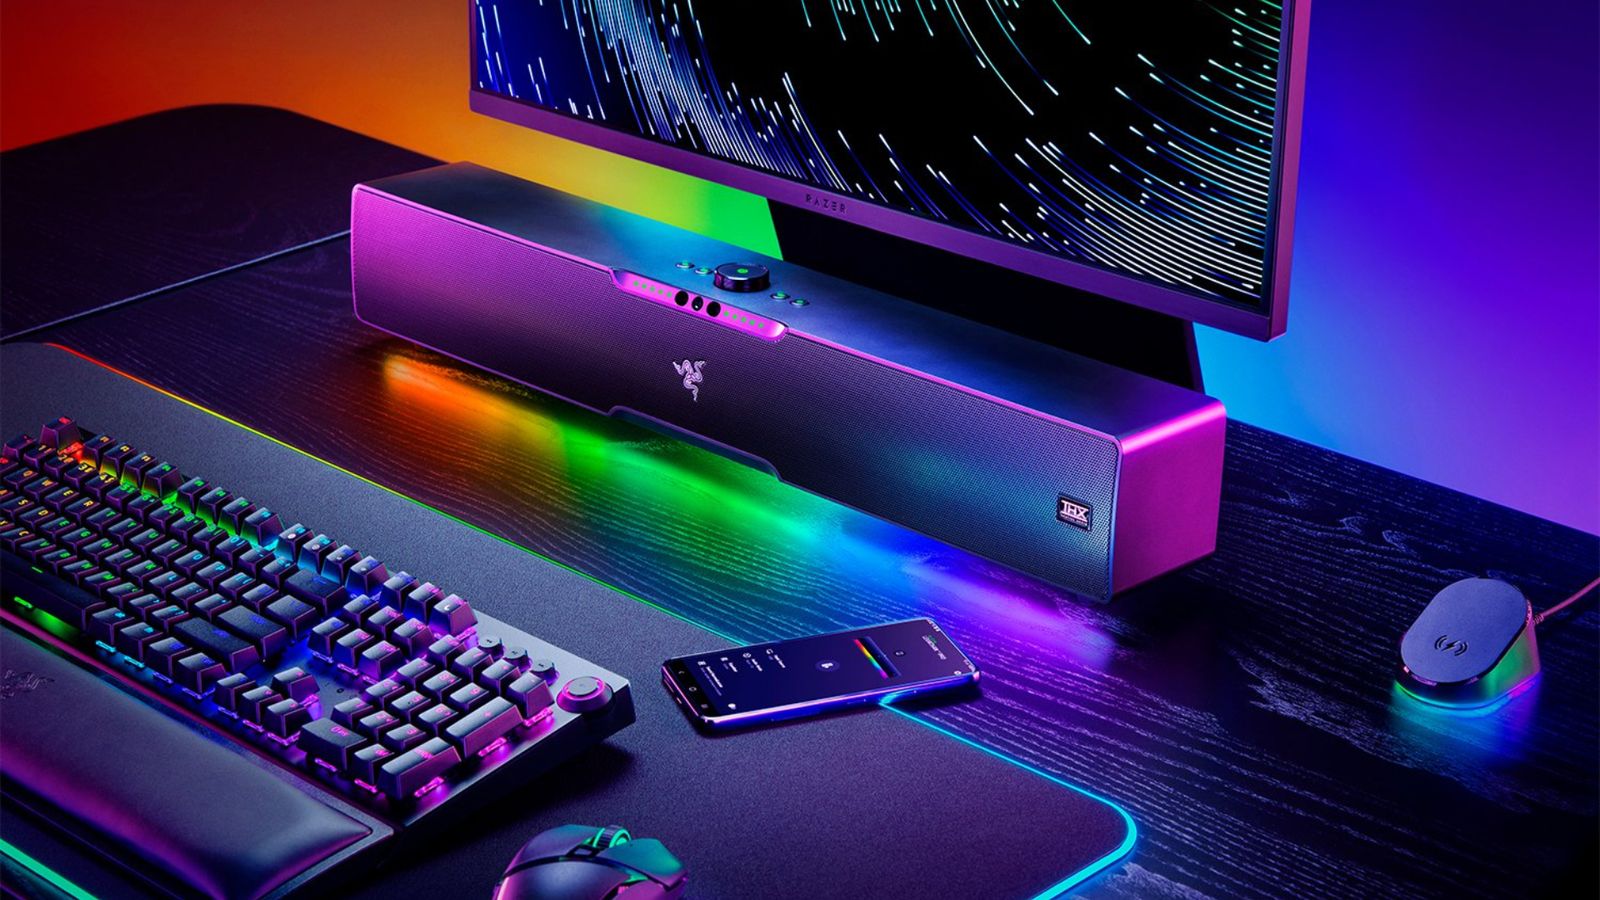 Best soundbar for gaming - Razer Leviathon V2 Pro product image of a black soundbar surrounded by RGB lighting sat at a desk with a monitor, keyboard, and mouse.